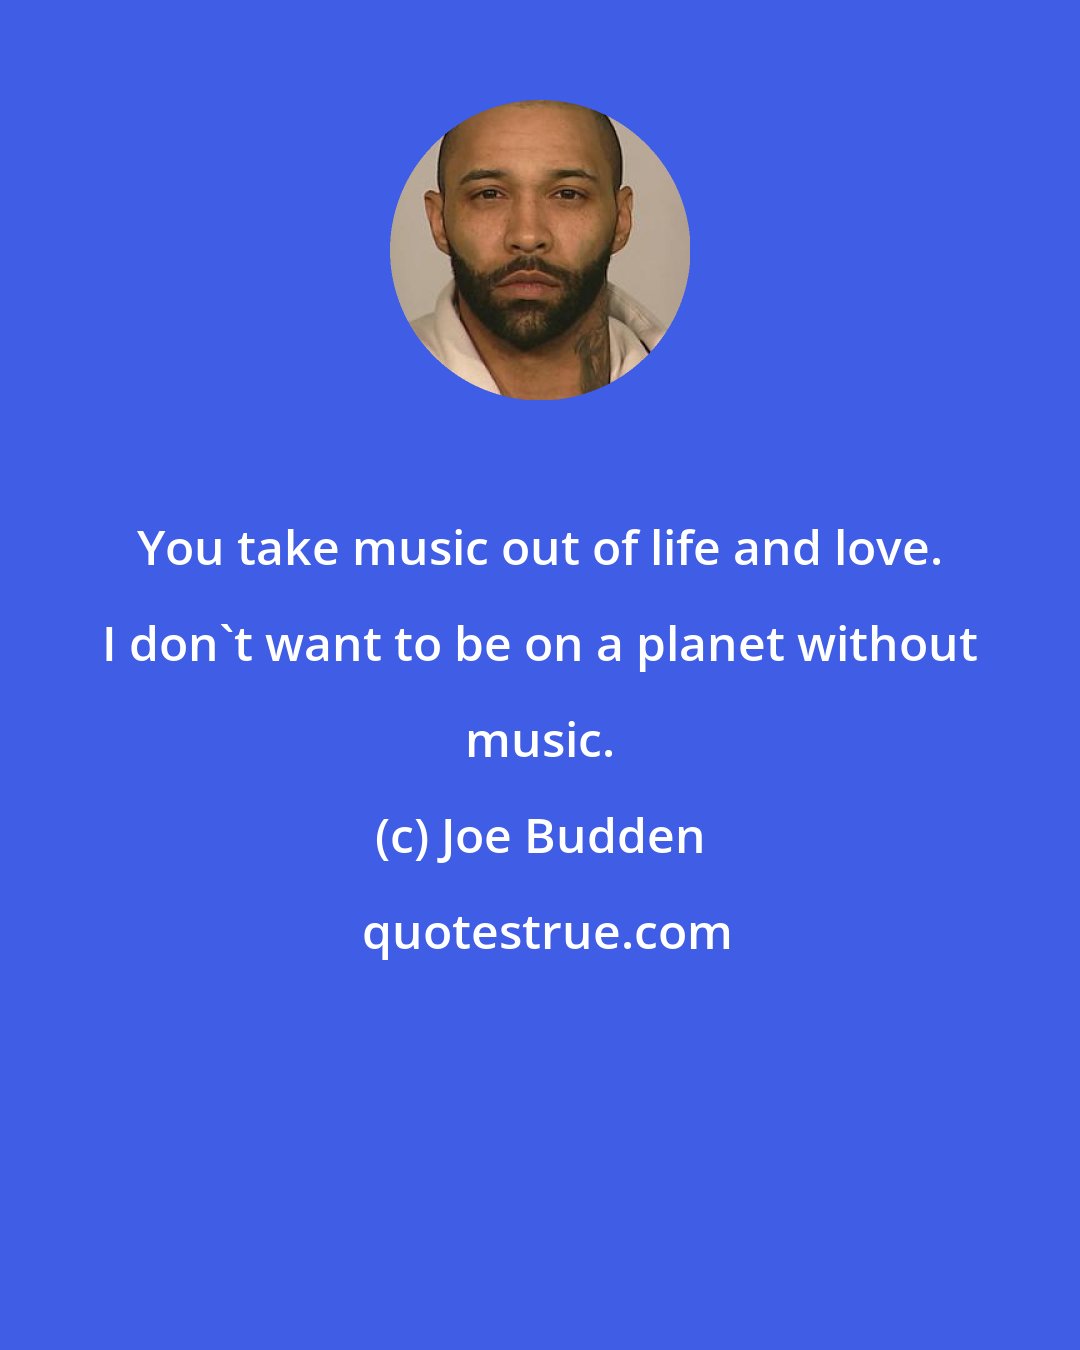 Joe Budden: You take music out of life and love. I don't want to be on a planet without music.